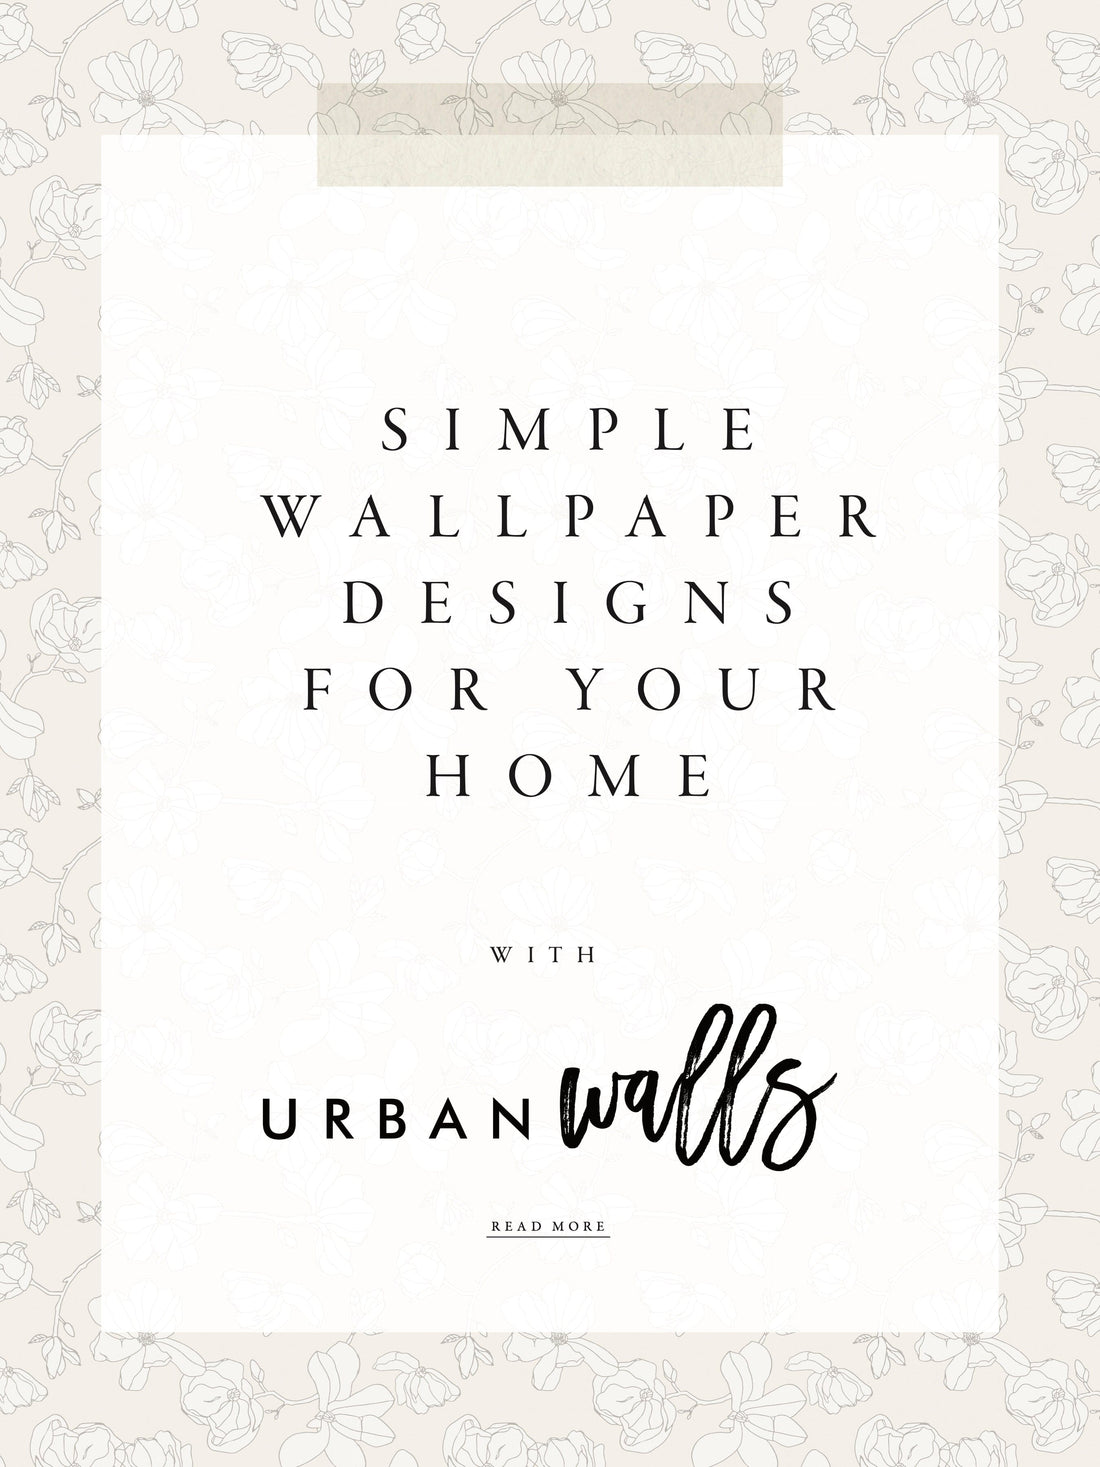 Simple Wallpaper Designs for Your Home